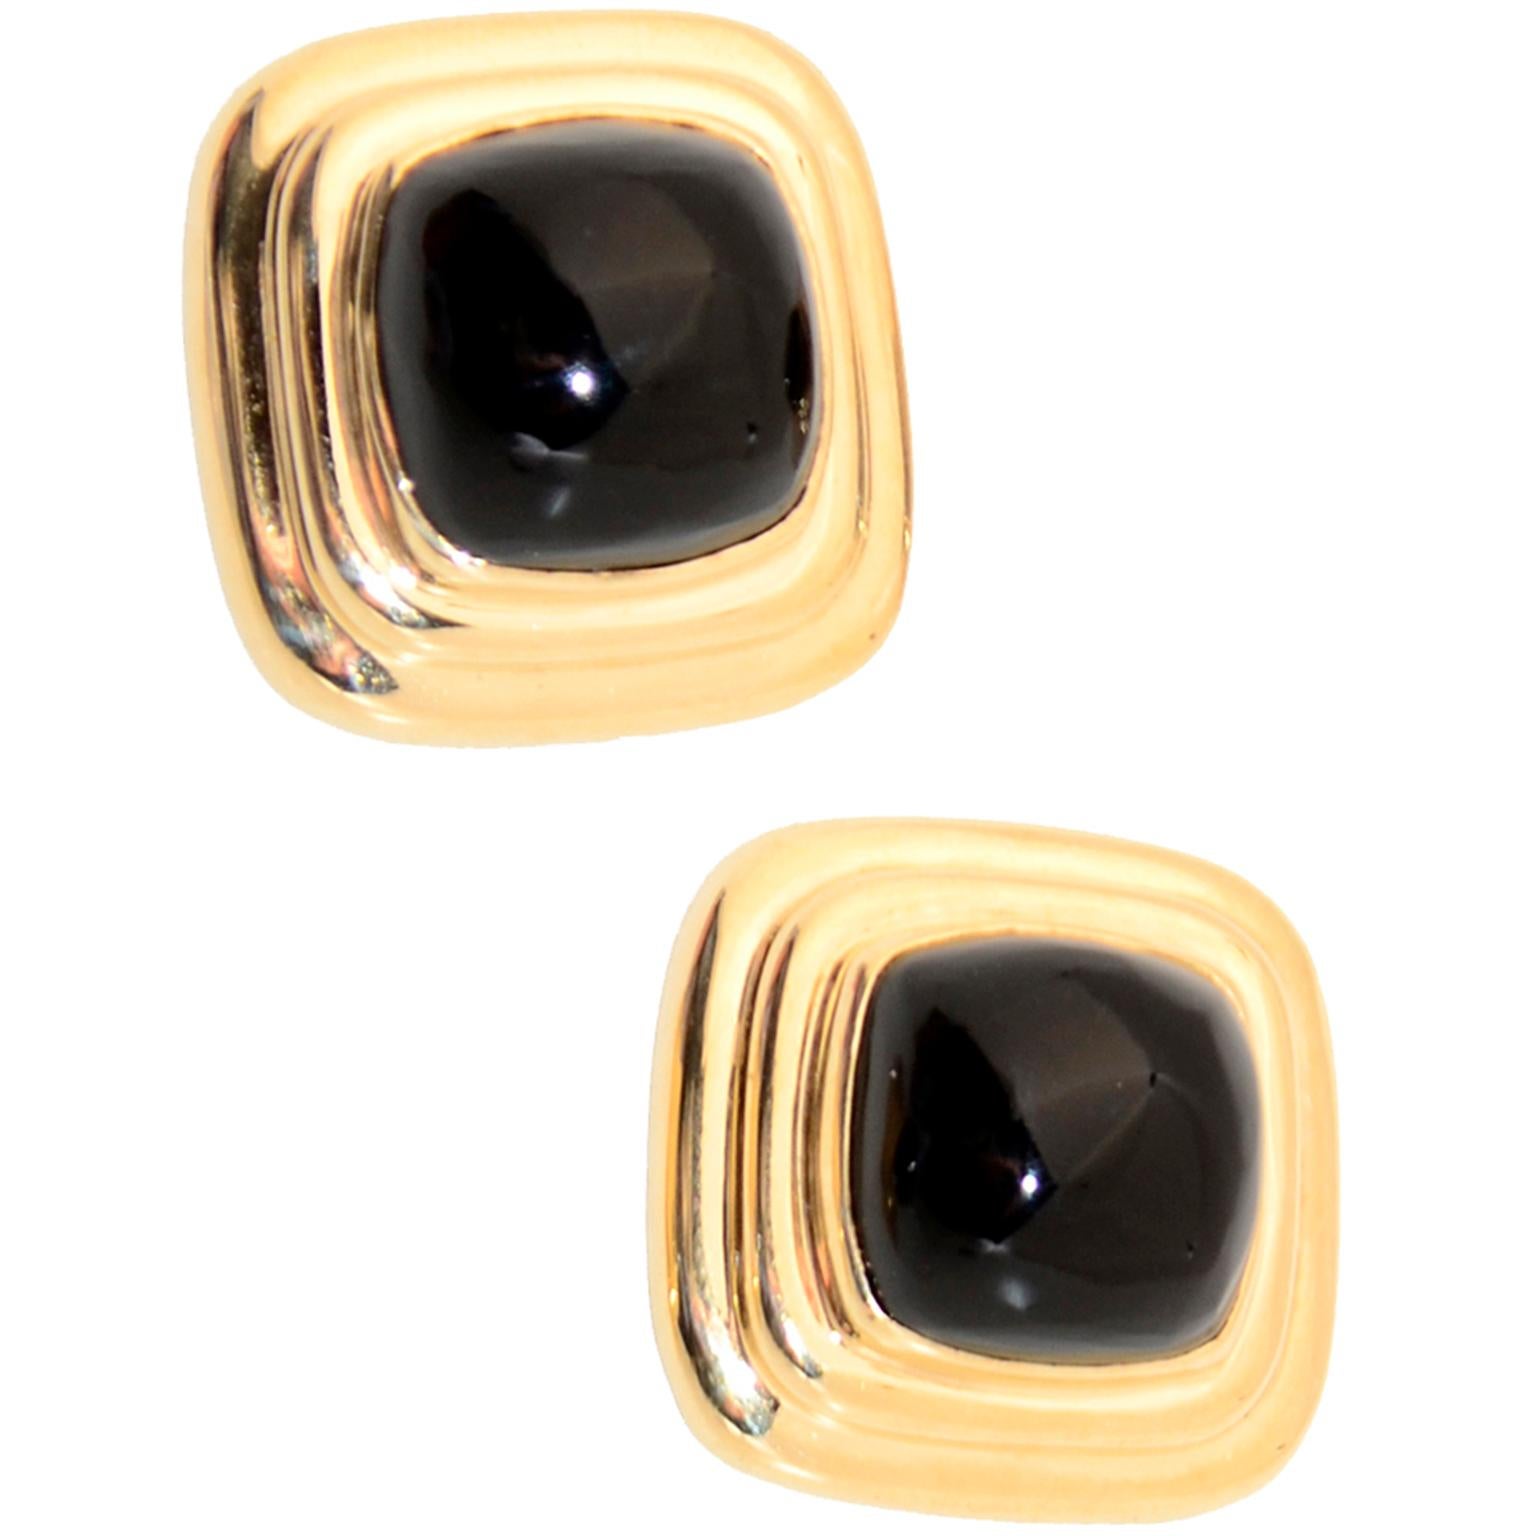 These are incredible vintage 14k gold square domed earrings with a black onyx center stone. The ribbed gold radiates from the center onyx stone and there are omega style clips on the back.  These earrings are marked 14k and MAZ. They are very